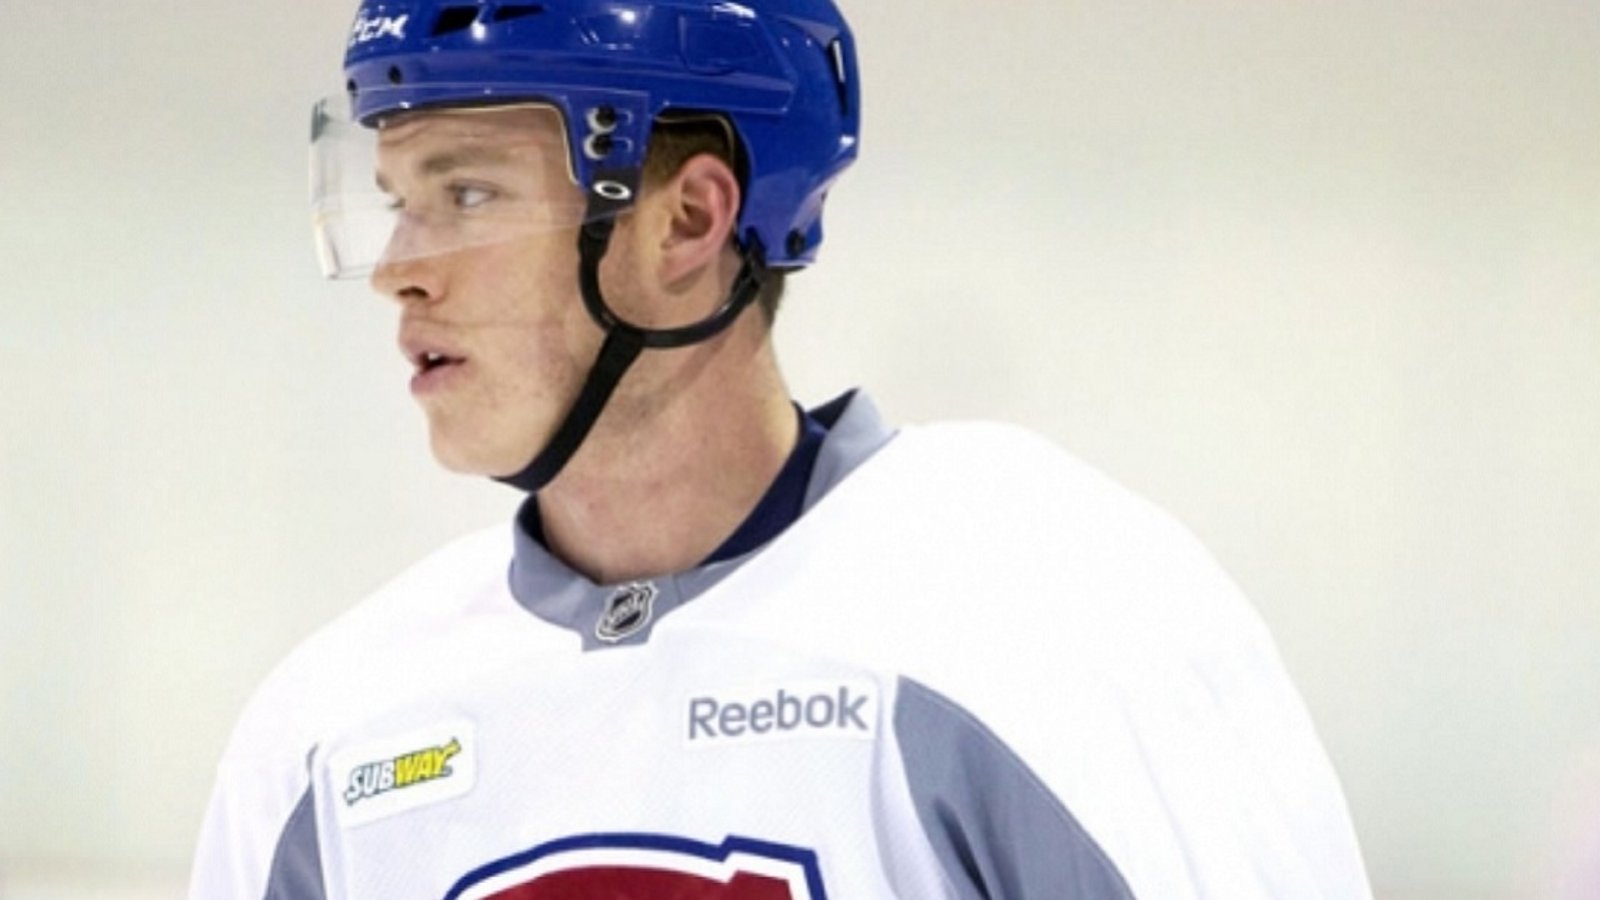 Former Habs center retires at just 24 years old due to injury.